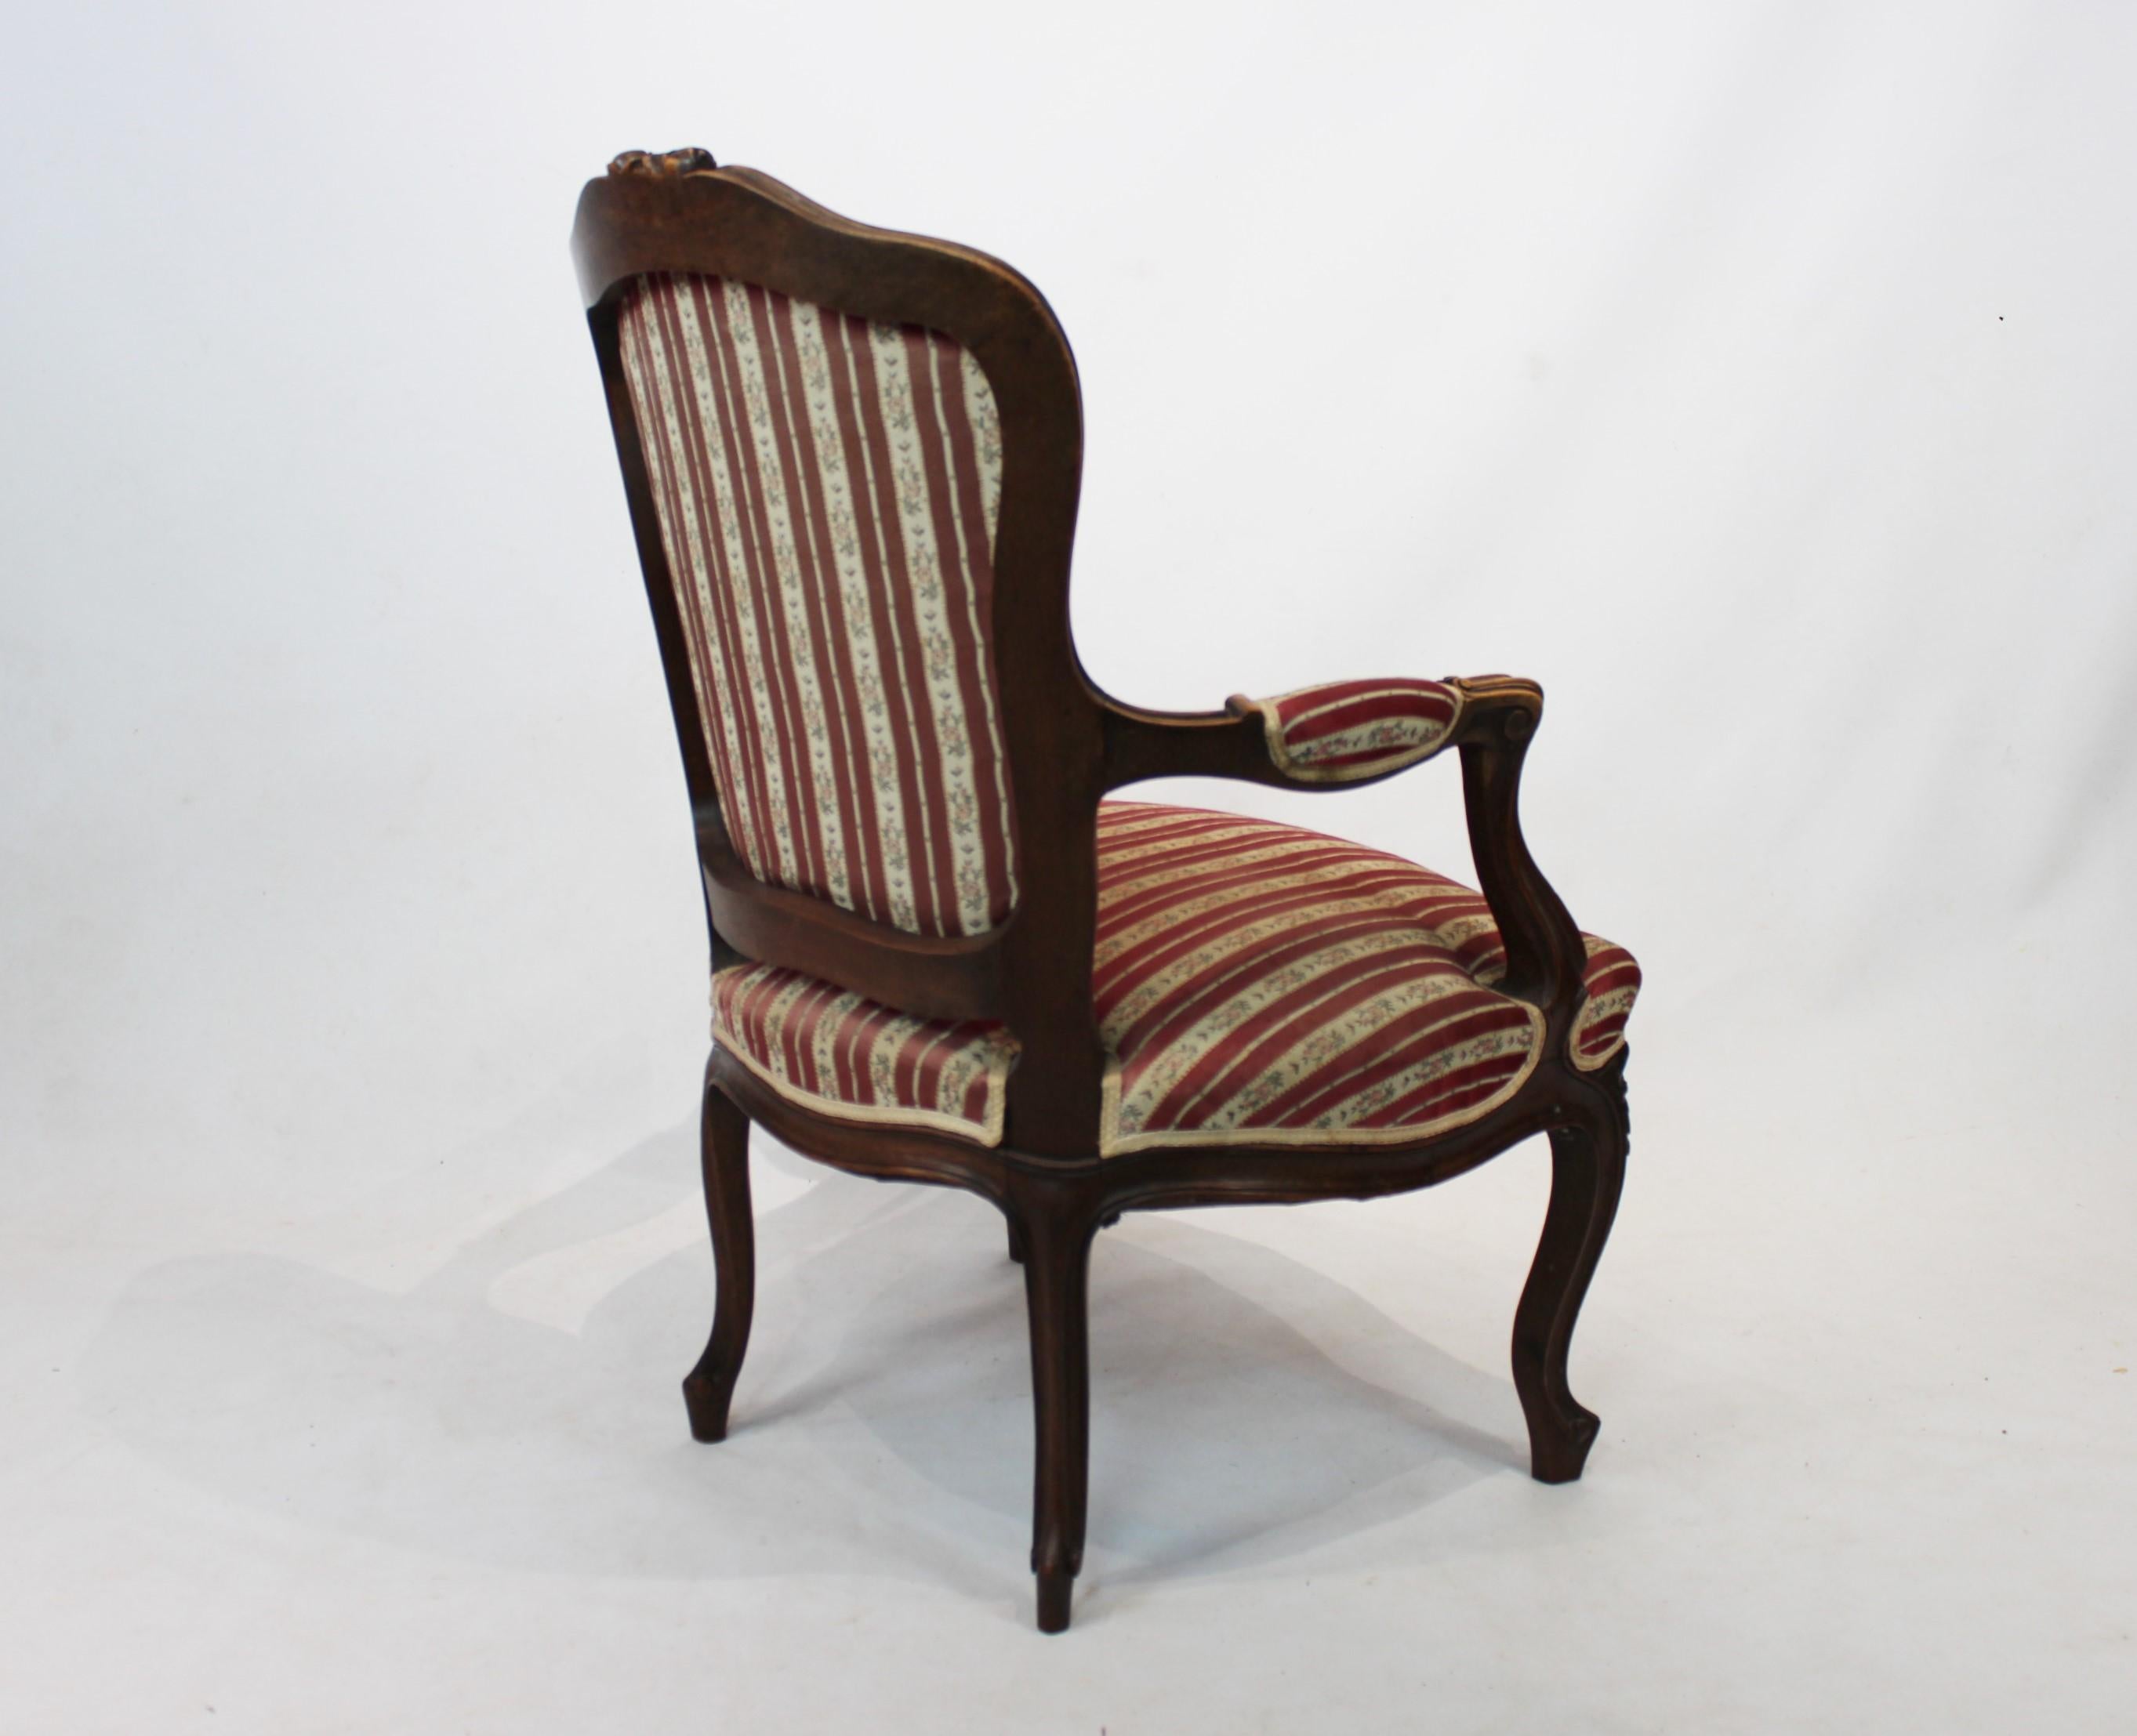 Rococo Revival New Rococo Armchair of Poliched Wood with Carvings, 1890 For Sale